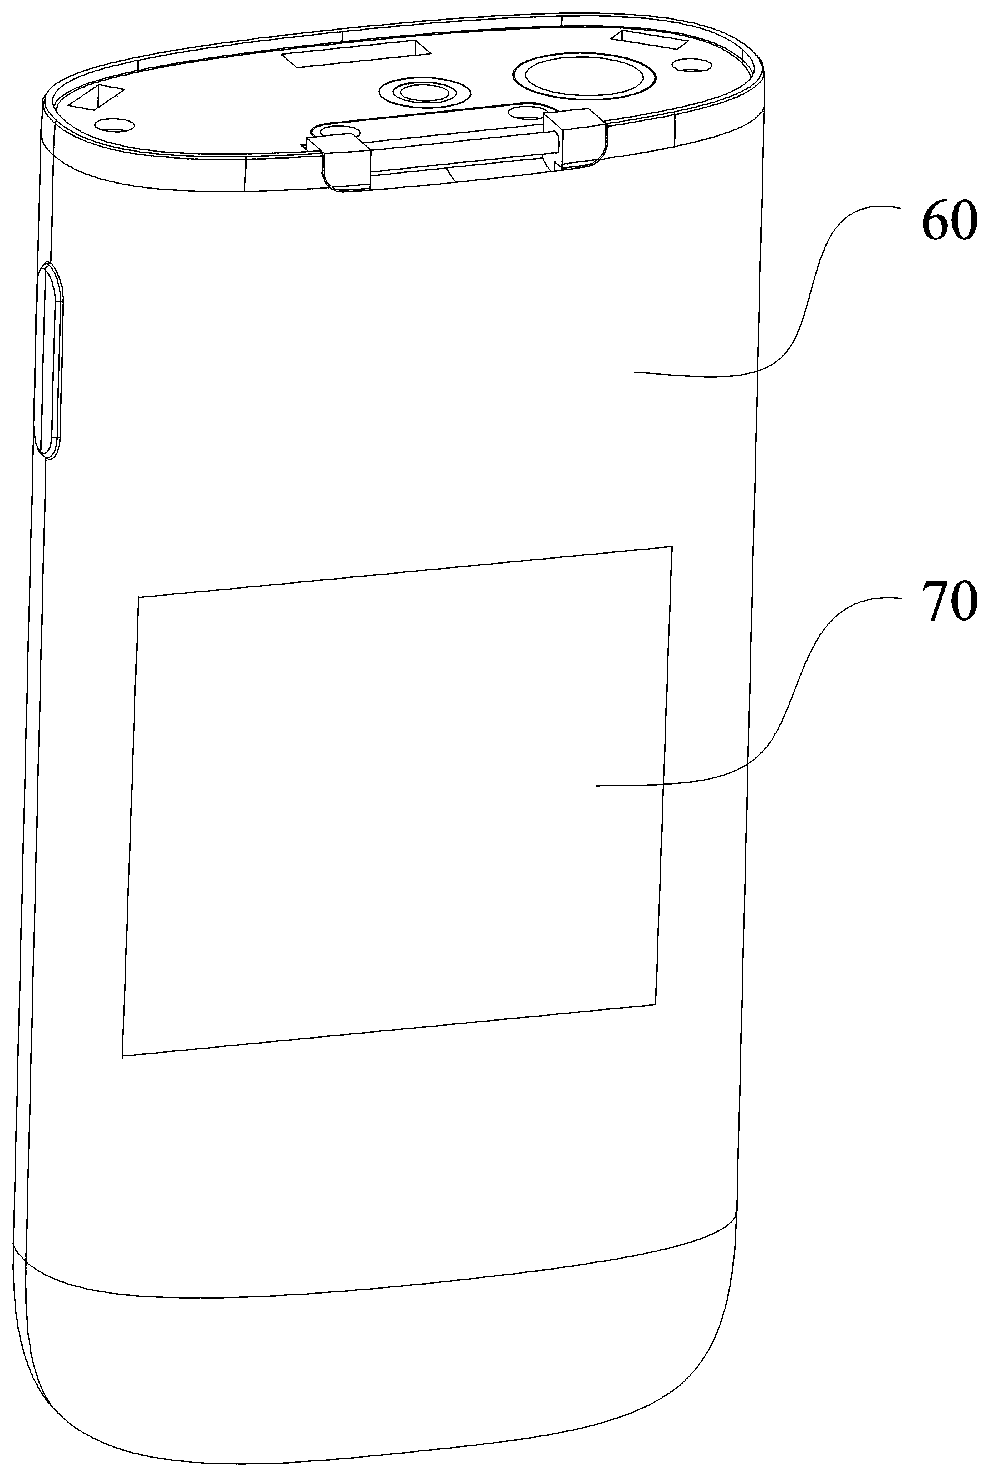 Health monitoring system and device based on piezoelectric technology